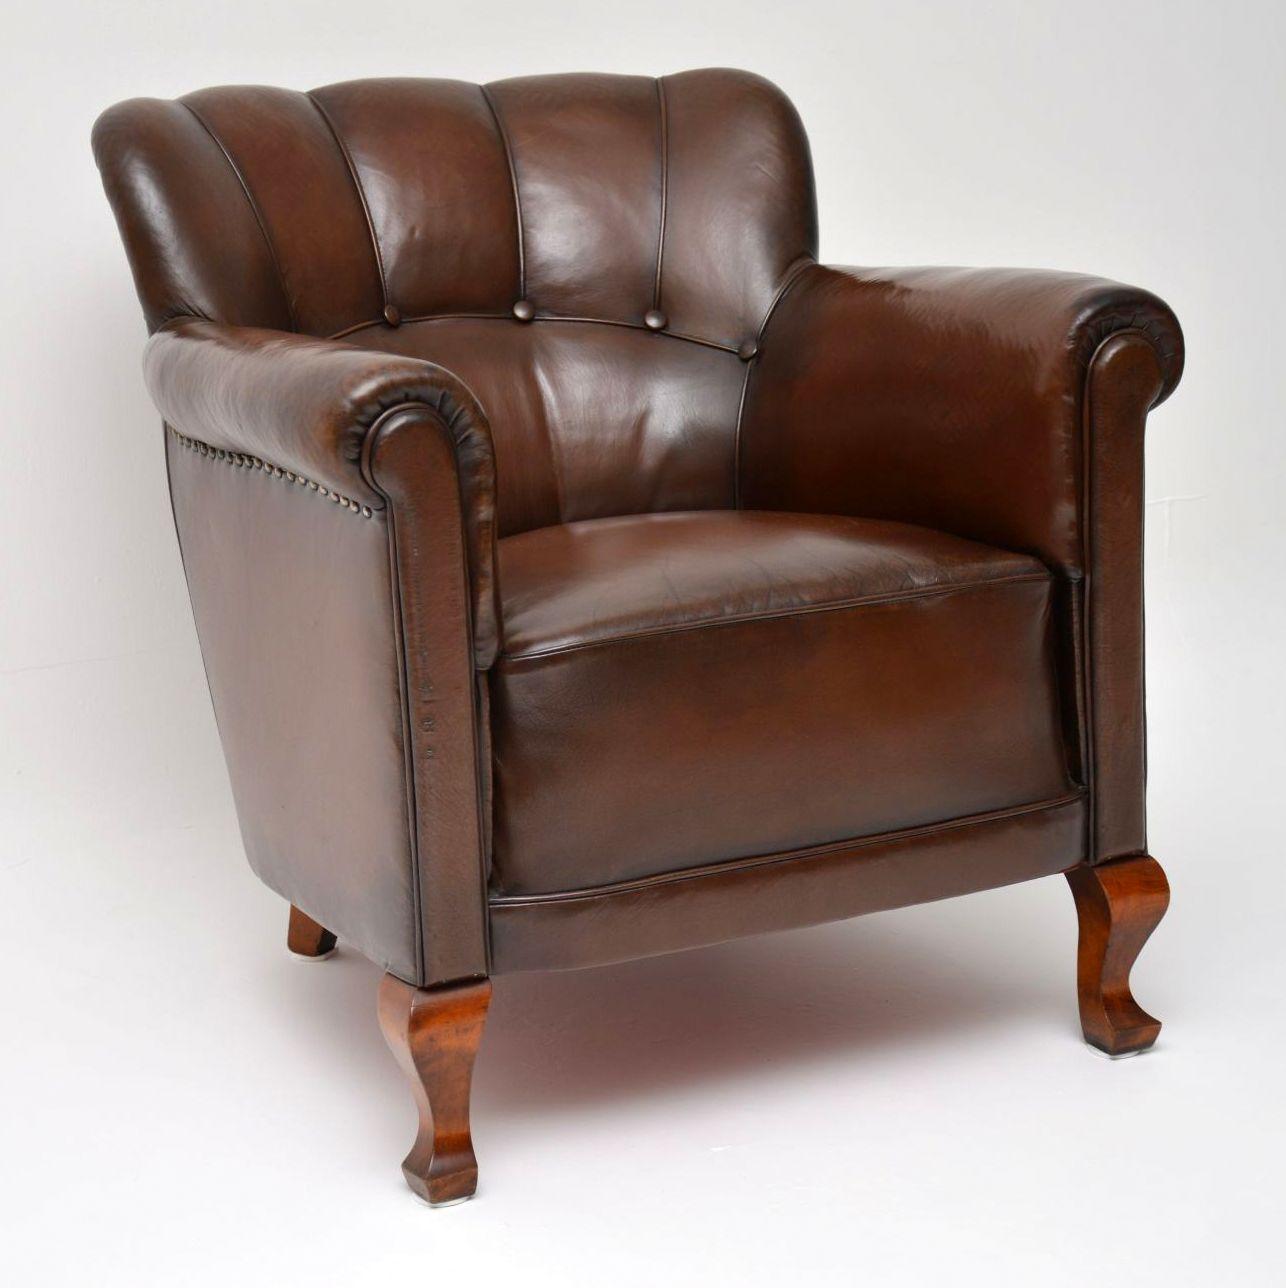 Early 20th Century Pair of Antique Swedish Leather Armchairs